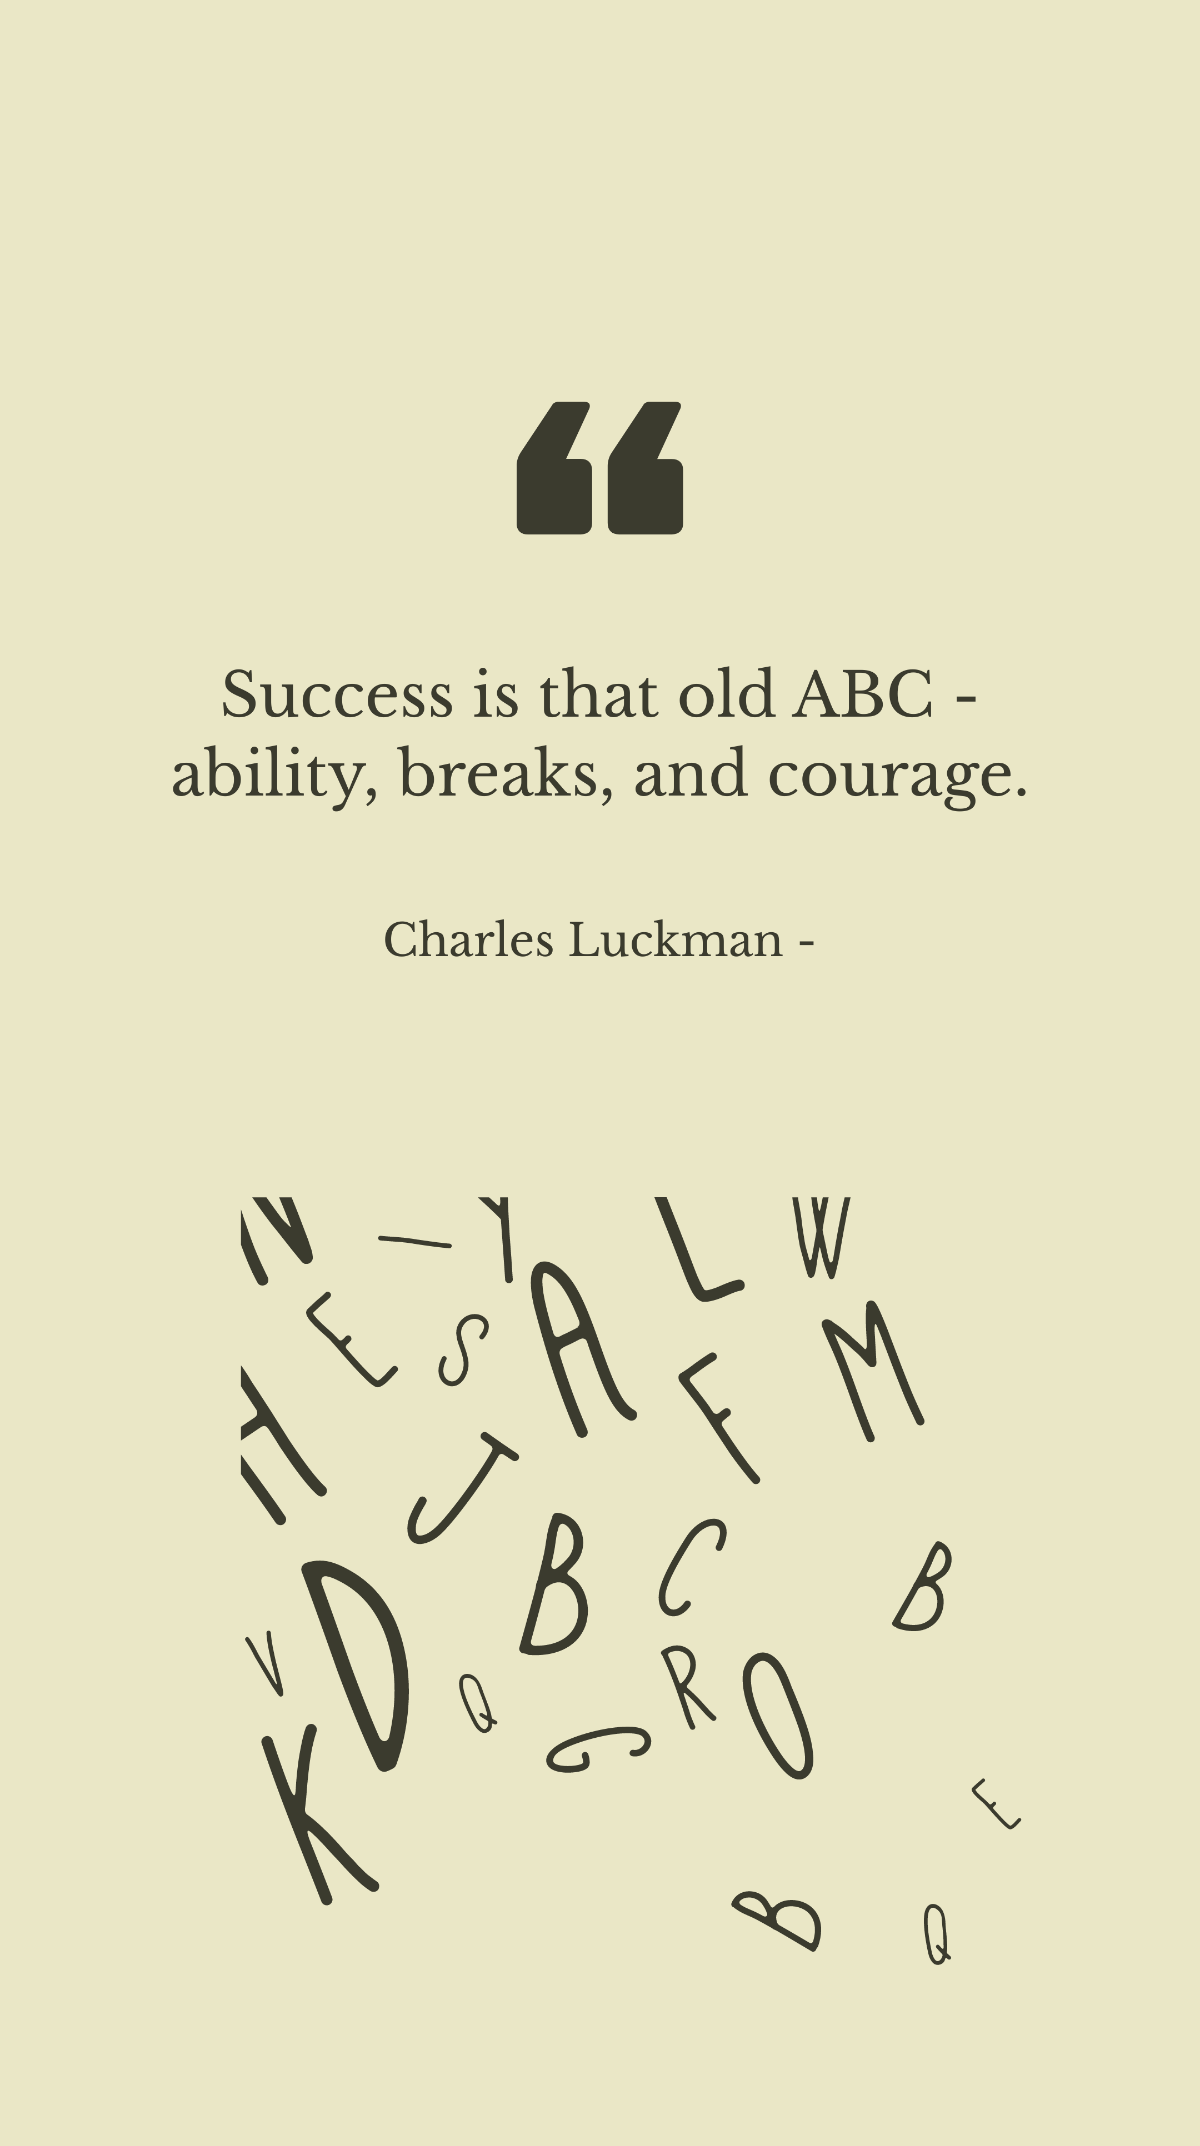 Free Charles Luckman - Success is that old ABC - ability, breaks, and courage. Template